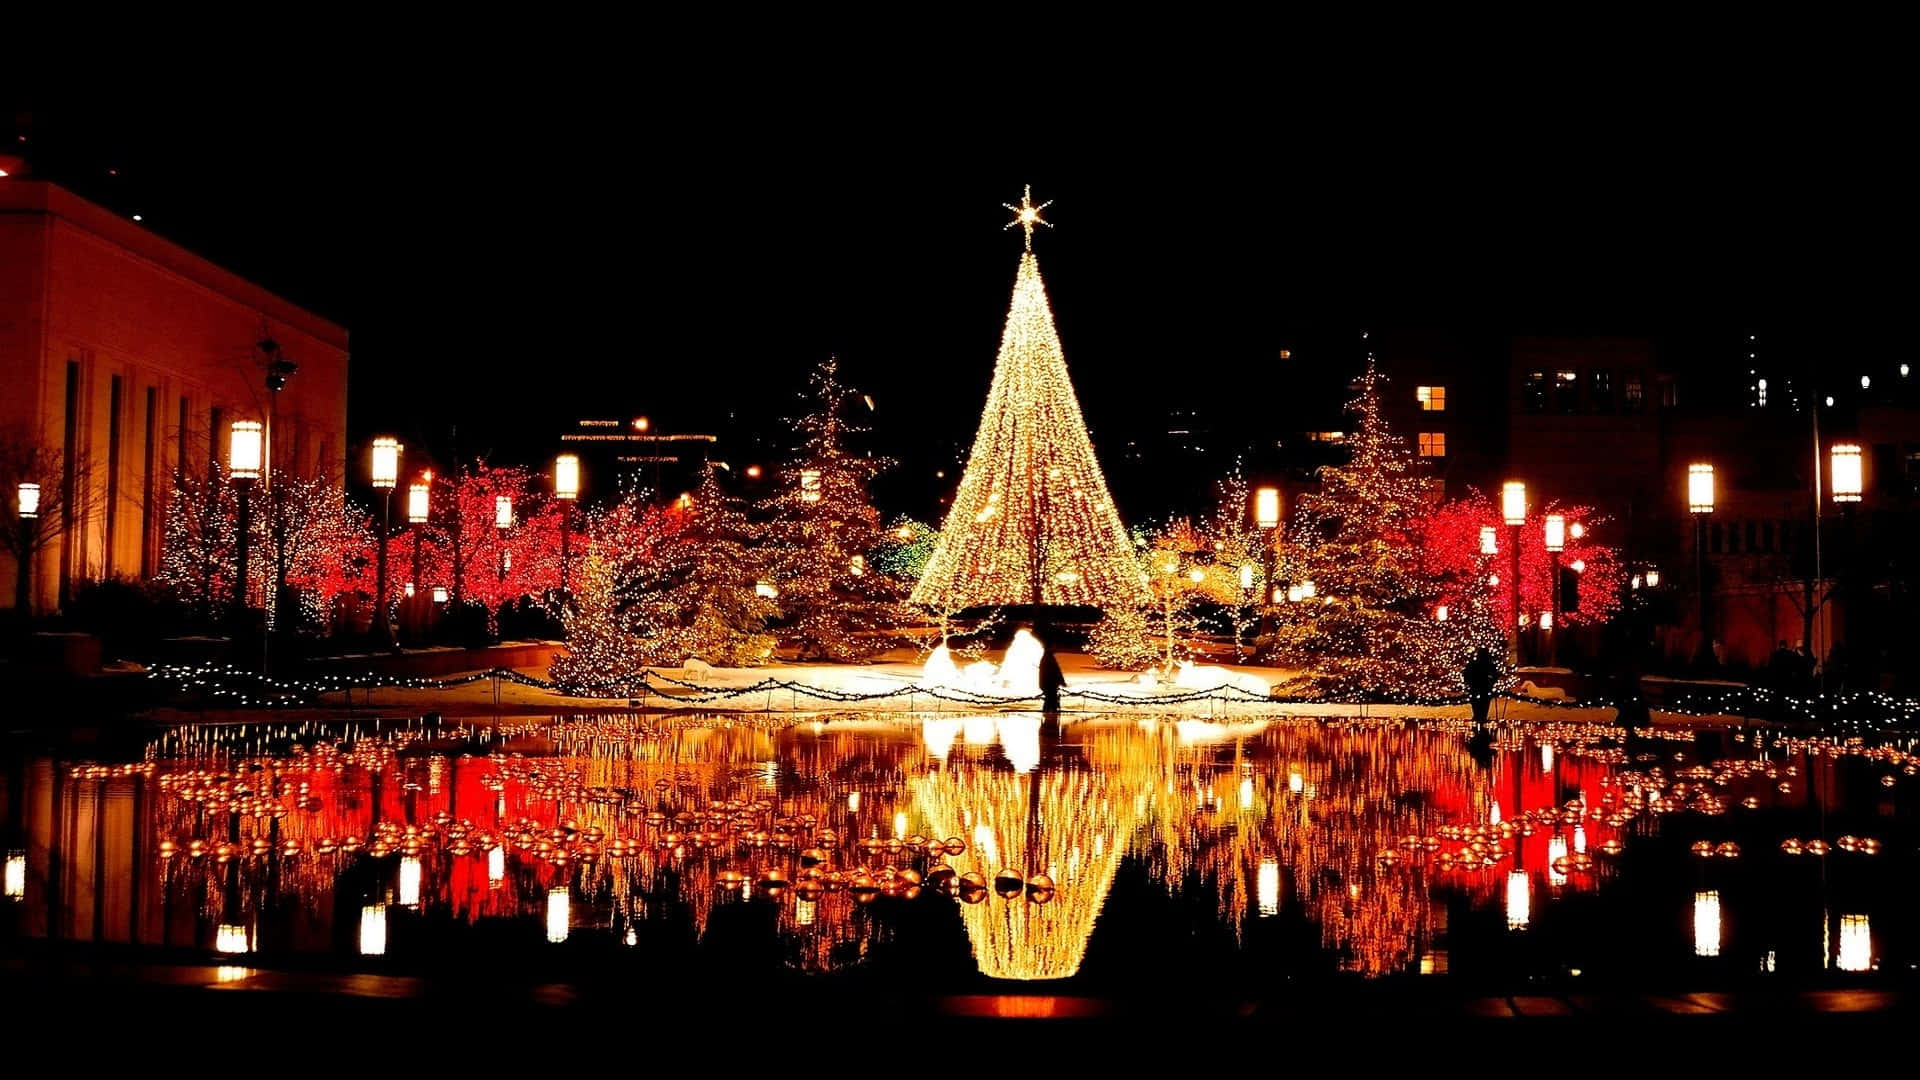 A Christmas Tree Is Lit Up In A Pond Wallpaper